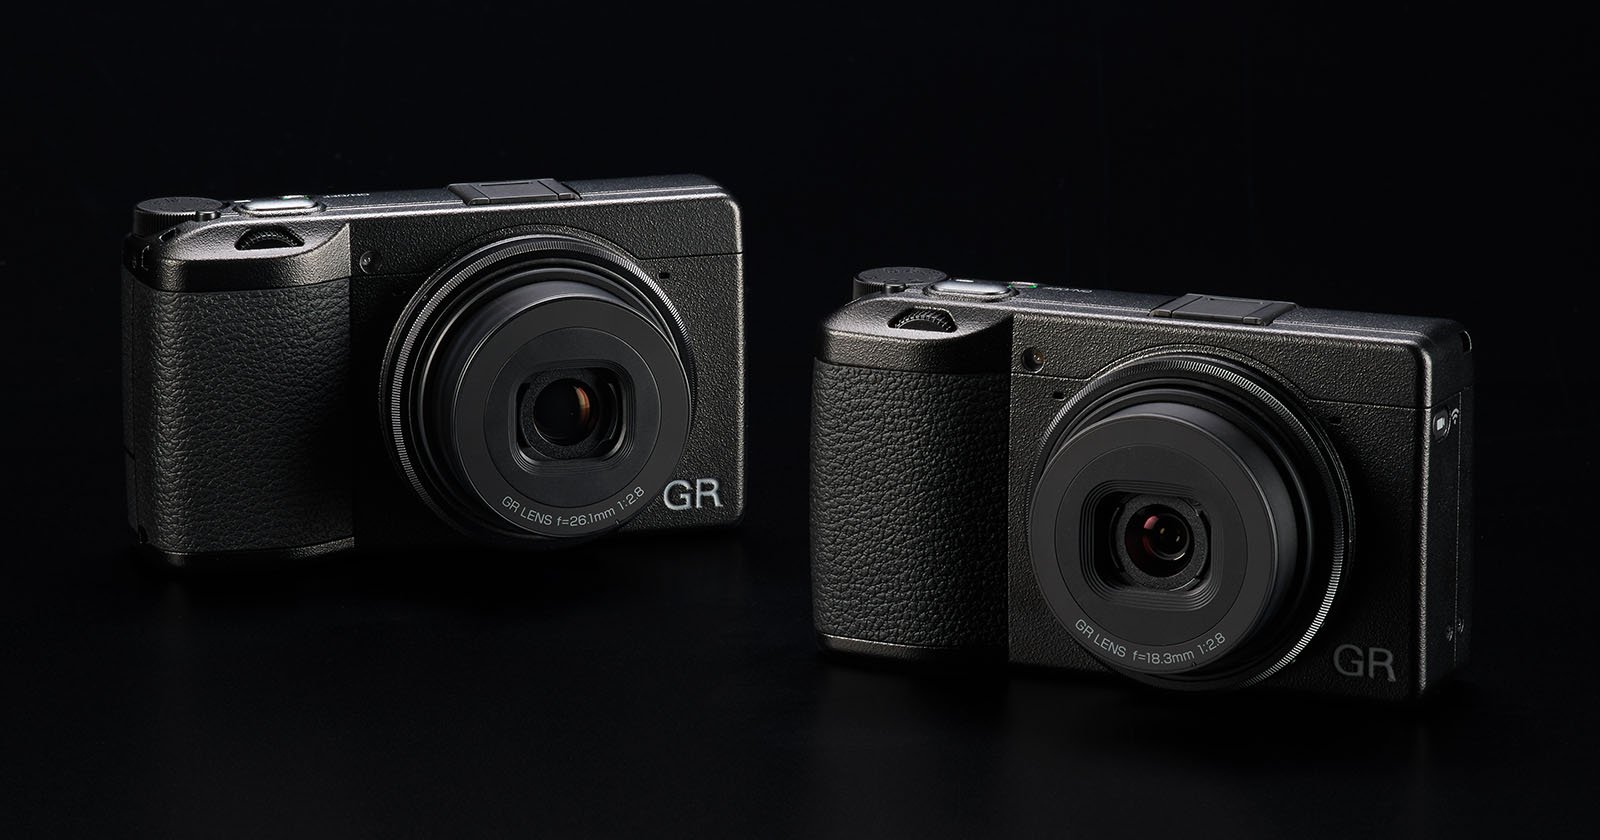 Ricohs New GR III HDF and GR IIIx HDF Cameras Feature a Dreamy Filter